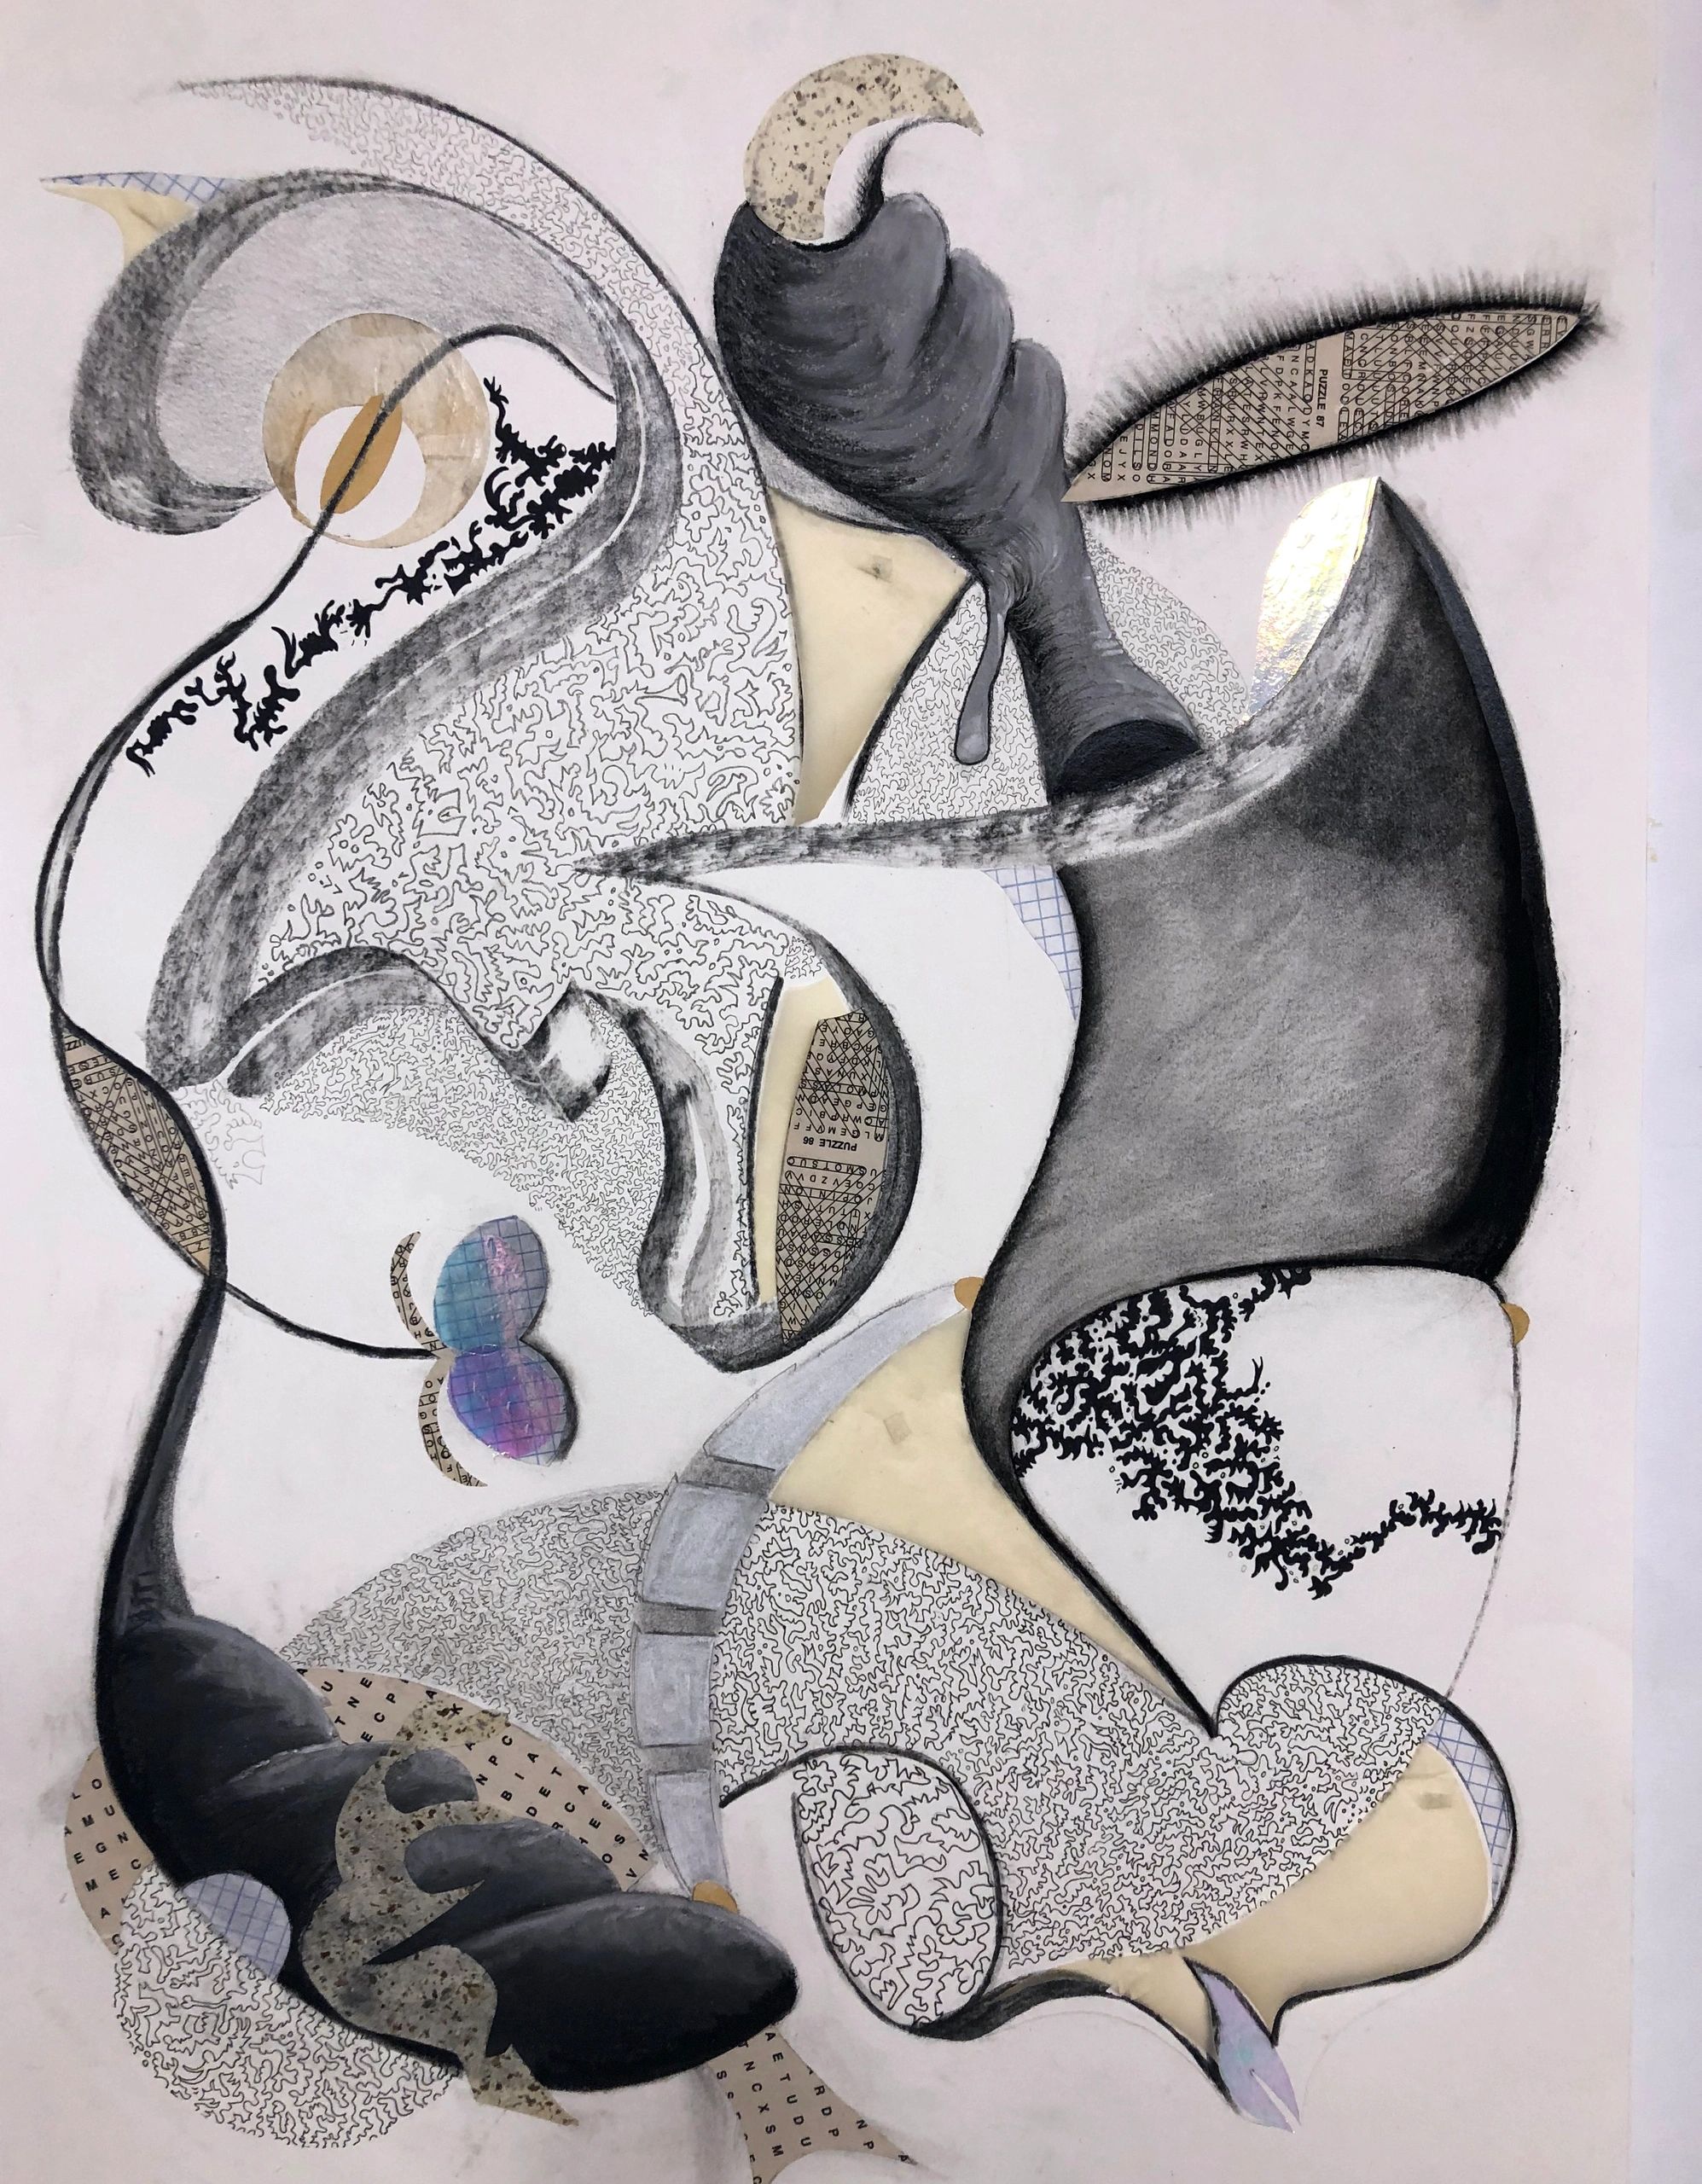 Collage, graphite, ink, charcoal on archival paper, mixed media, whimsical abstract art 